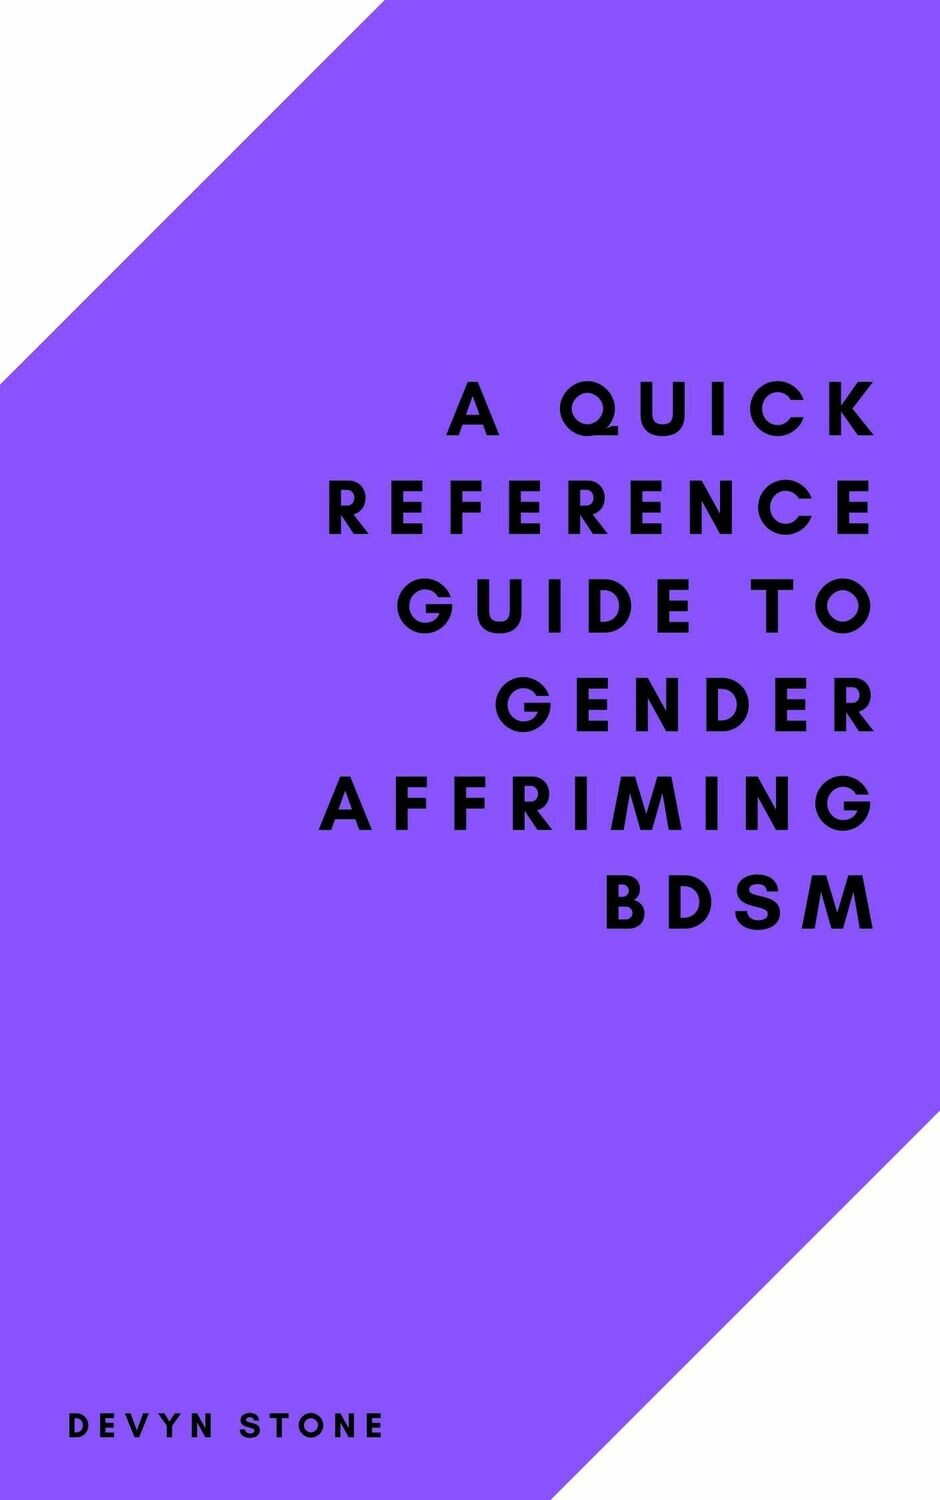 A Quick Reference Guide To Gender Affirming BDSM - Ebook